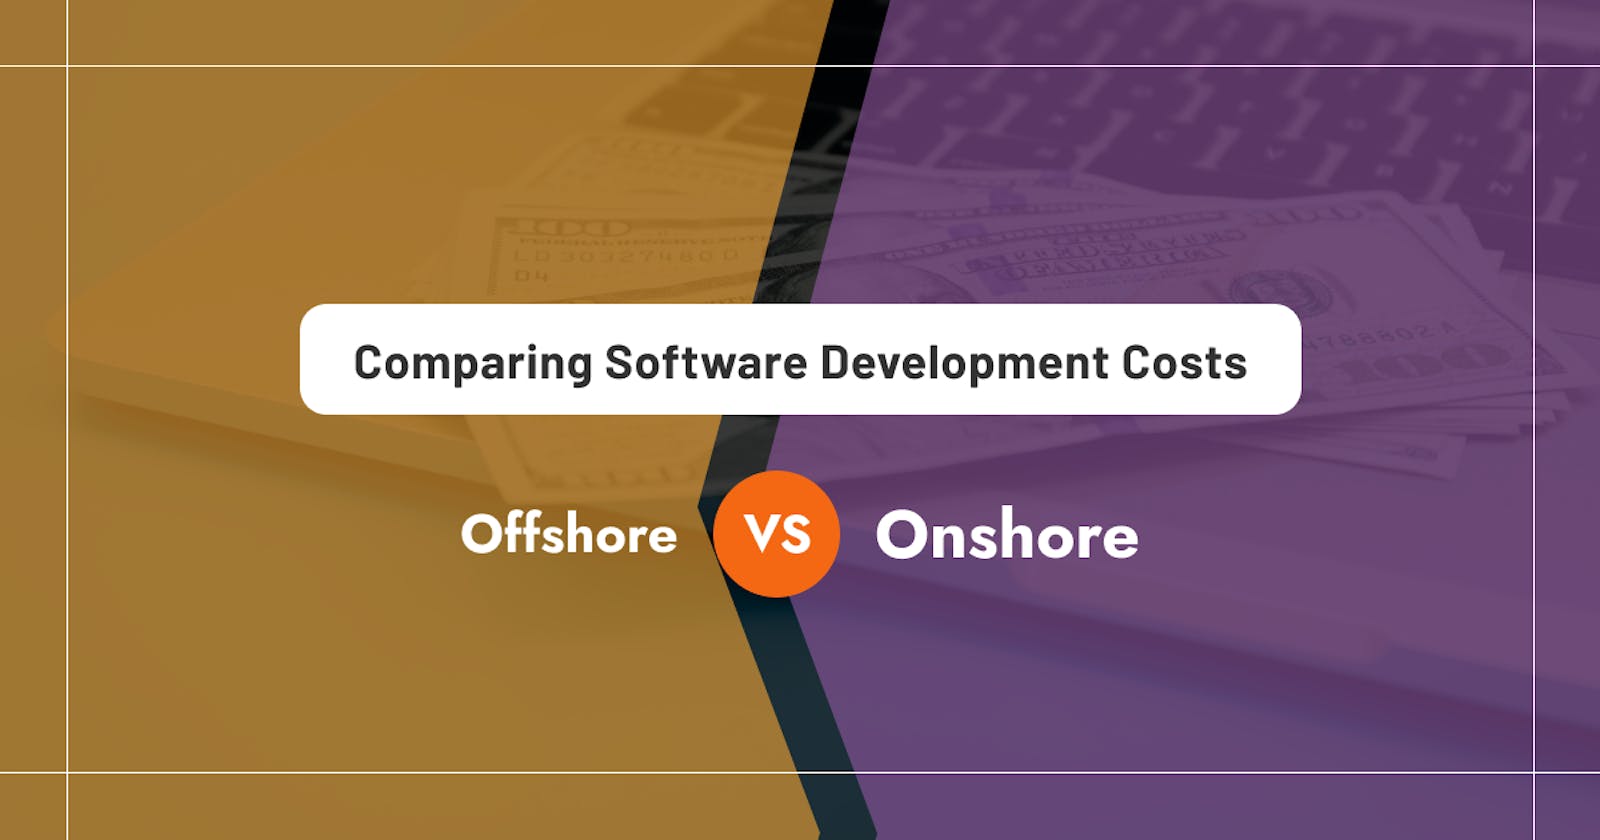 Comparing Software Development Costs: Offshore VS Onshore